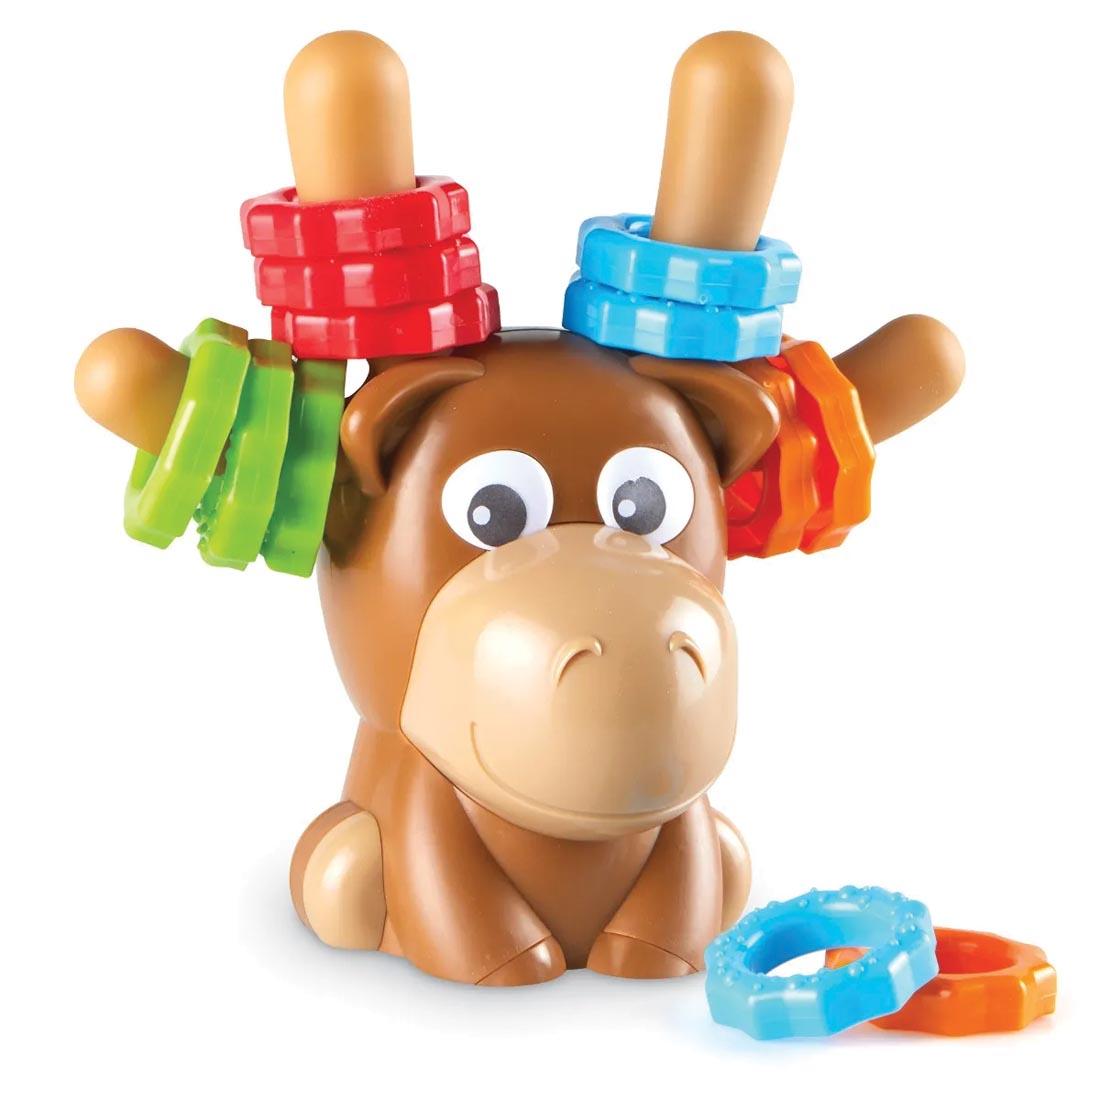 Max the Fine Motor Moose with colorful rings placed on its antlers